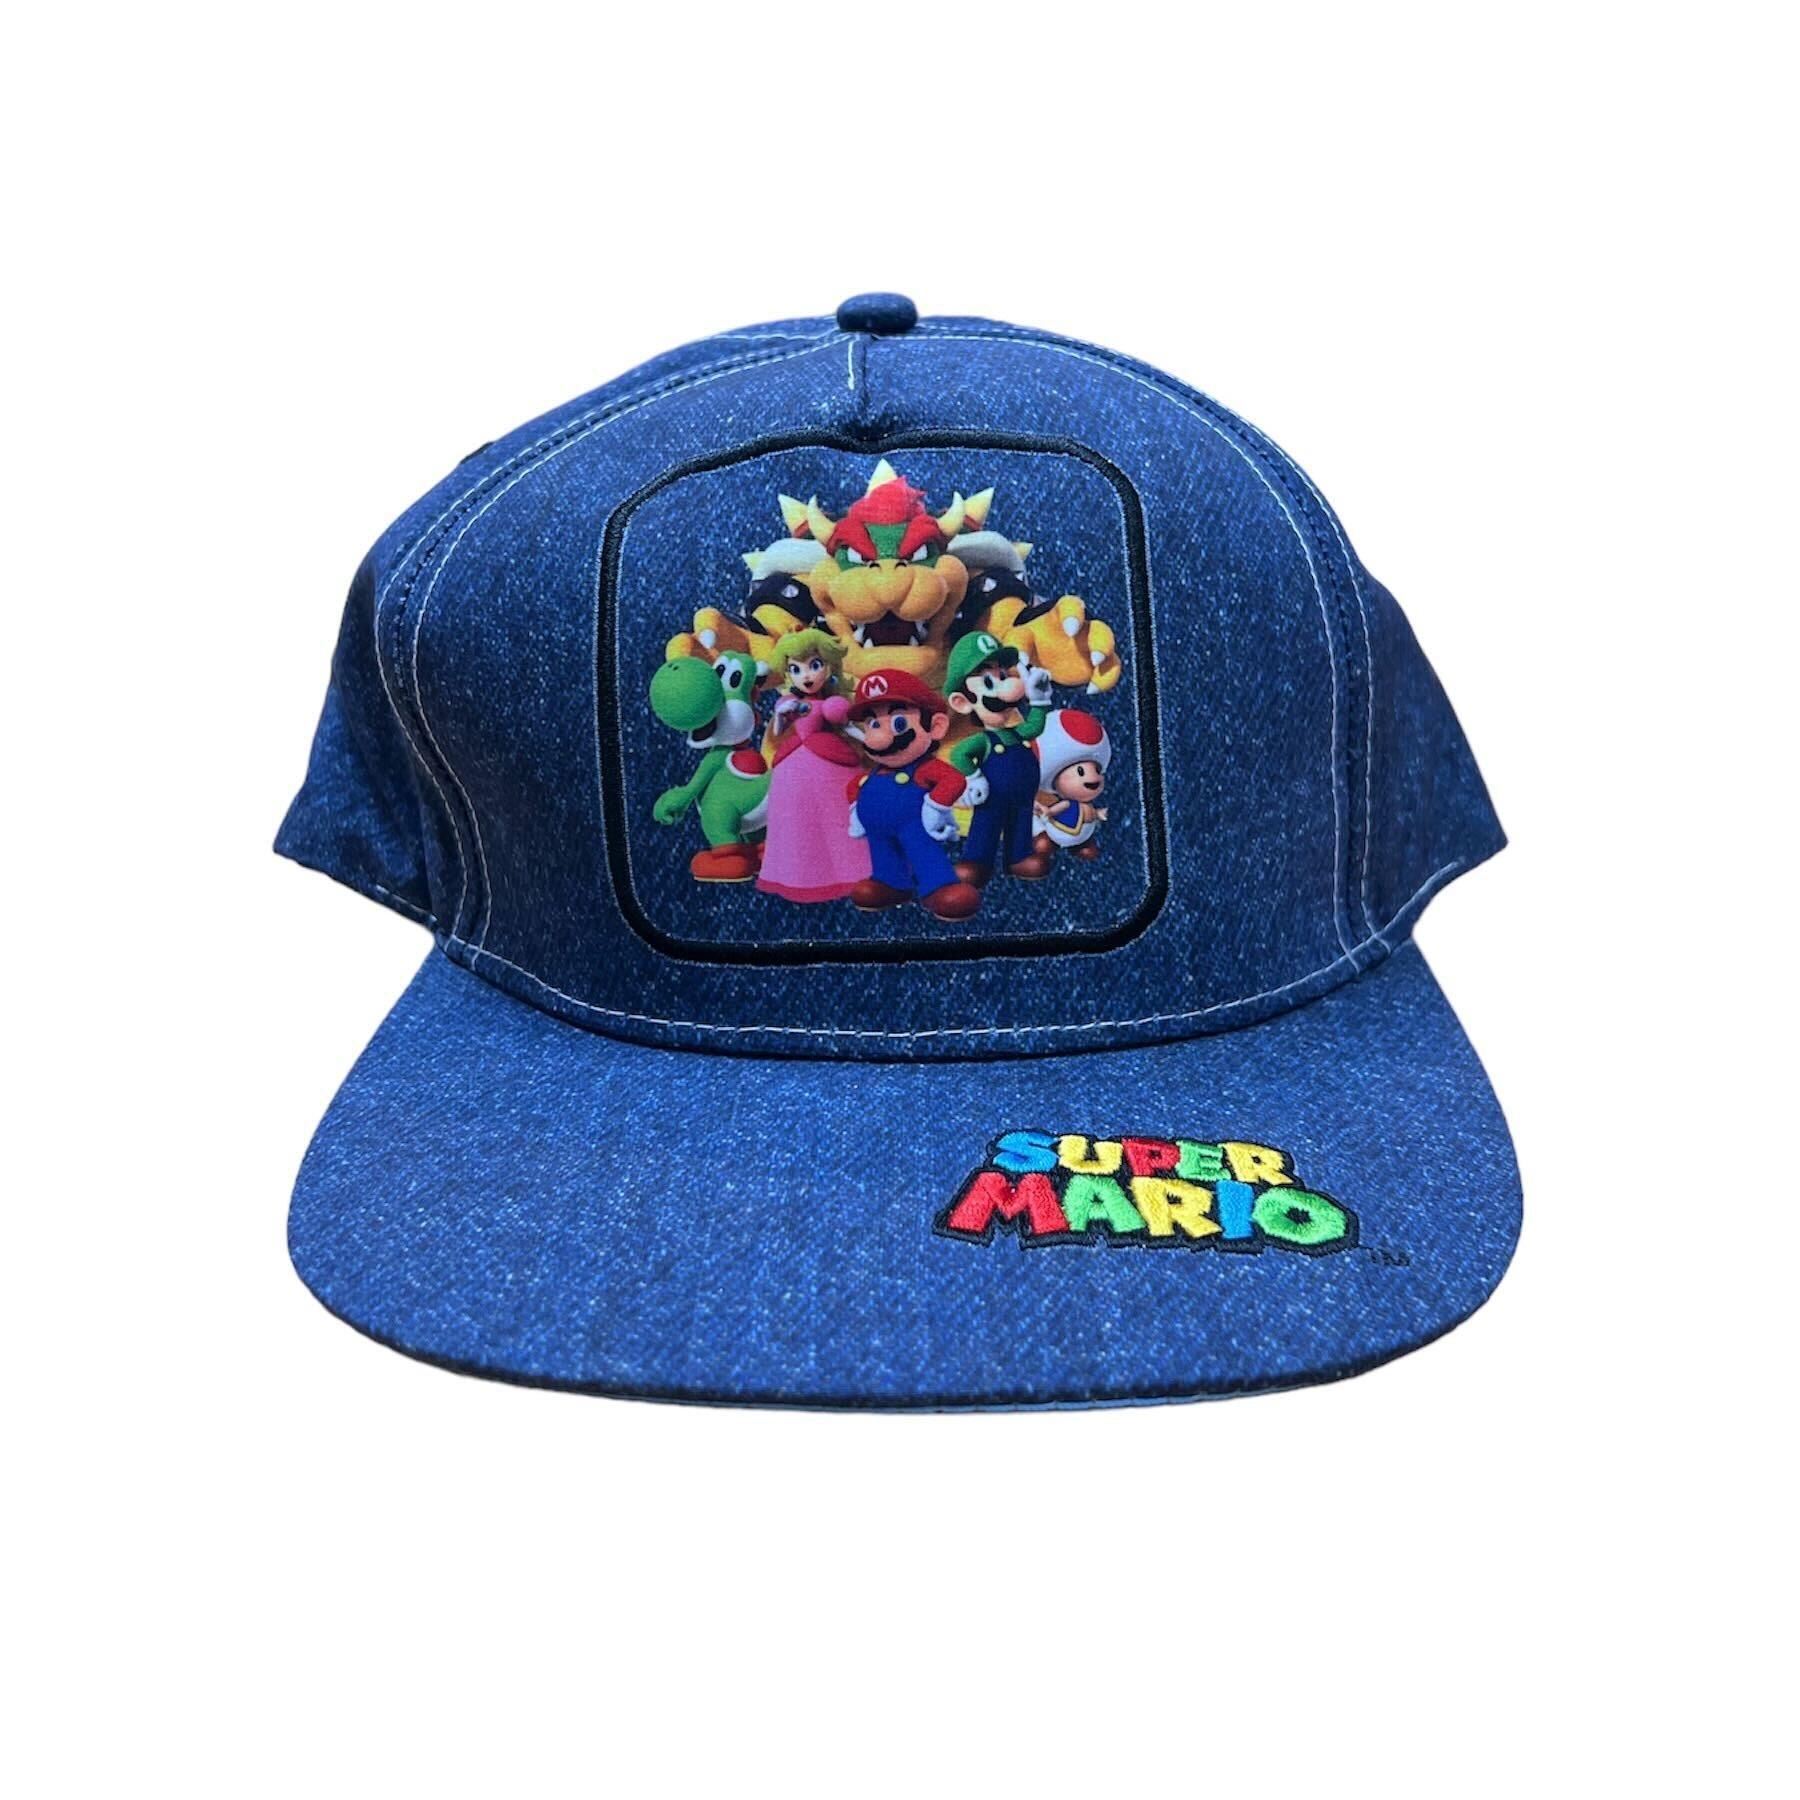 Mario & Friends Selfie Snapback Cap with Embroidered Details